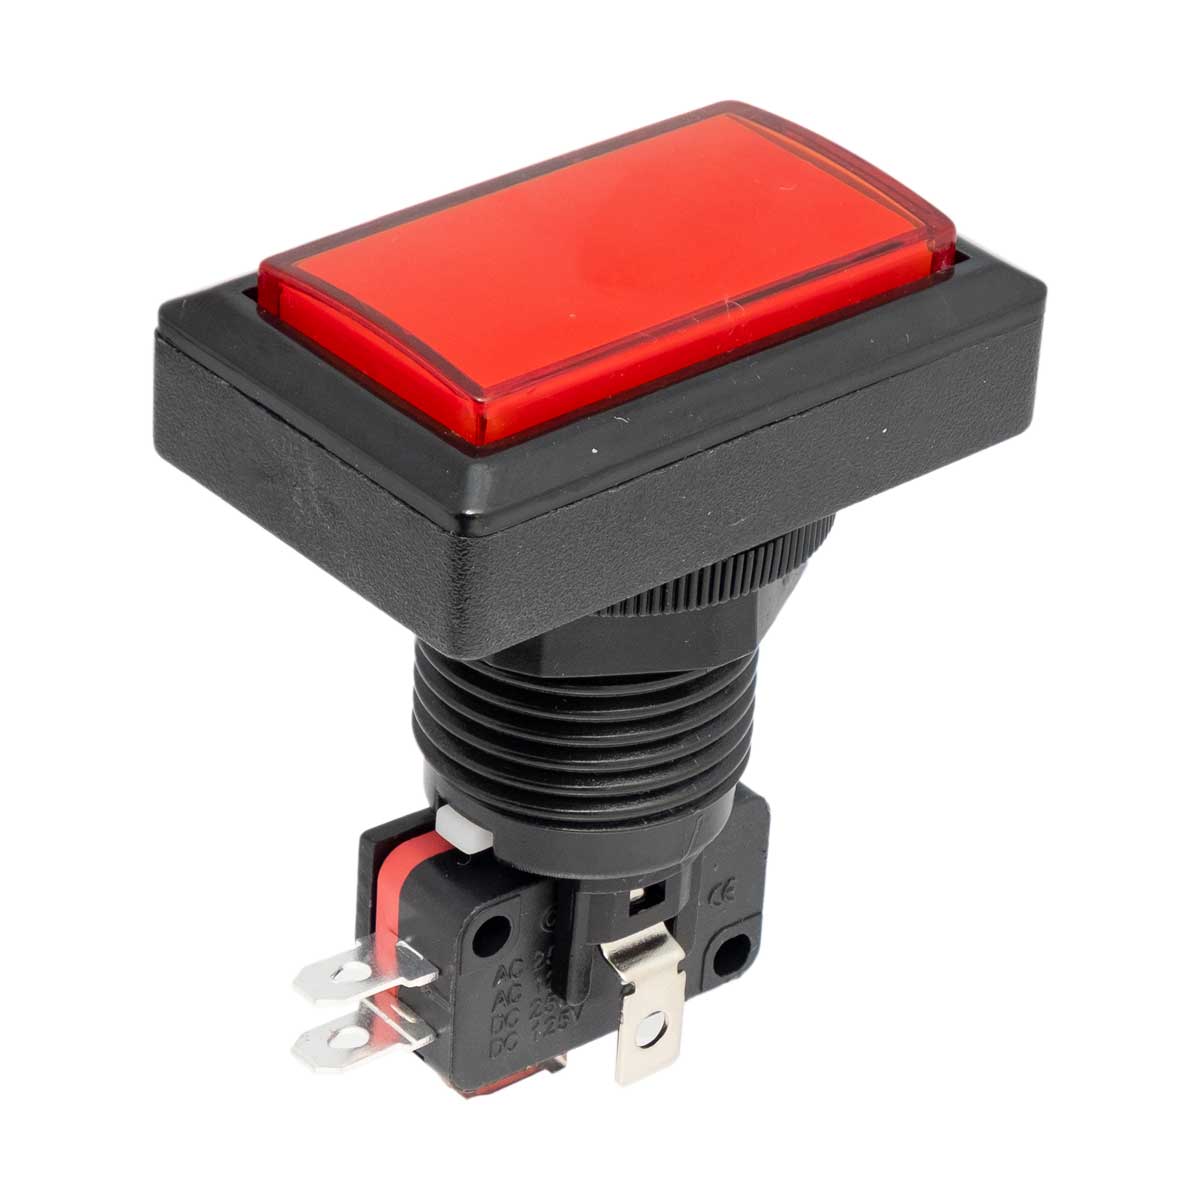 Arcade pushbutton with red LED, 41x23mm, Ø24mm, 16A/250V AC